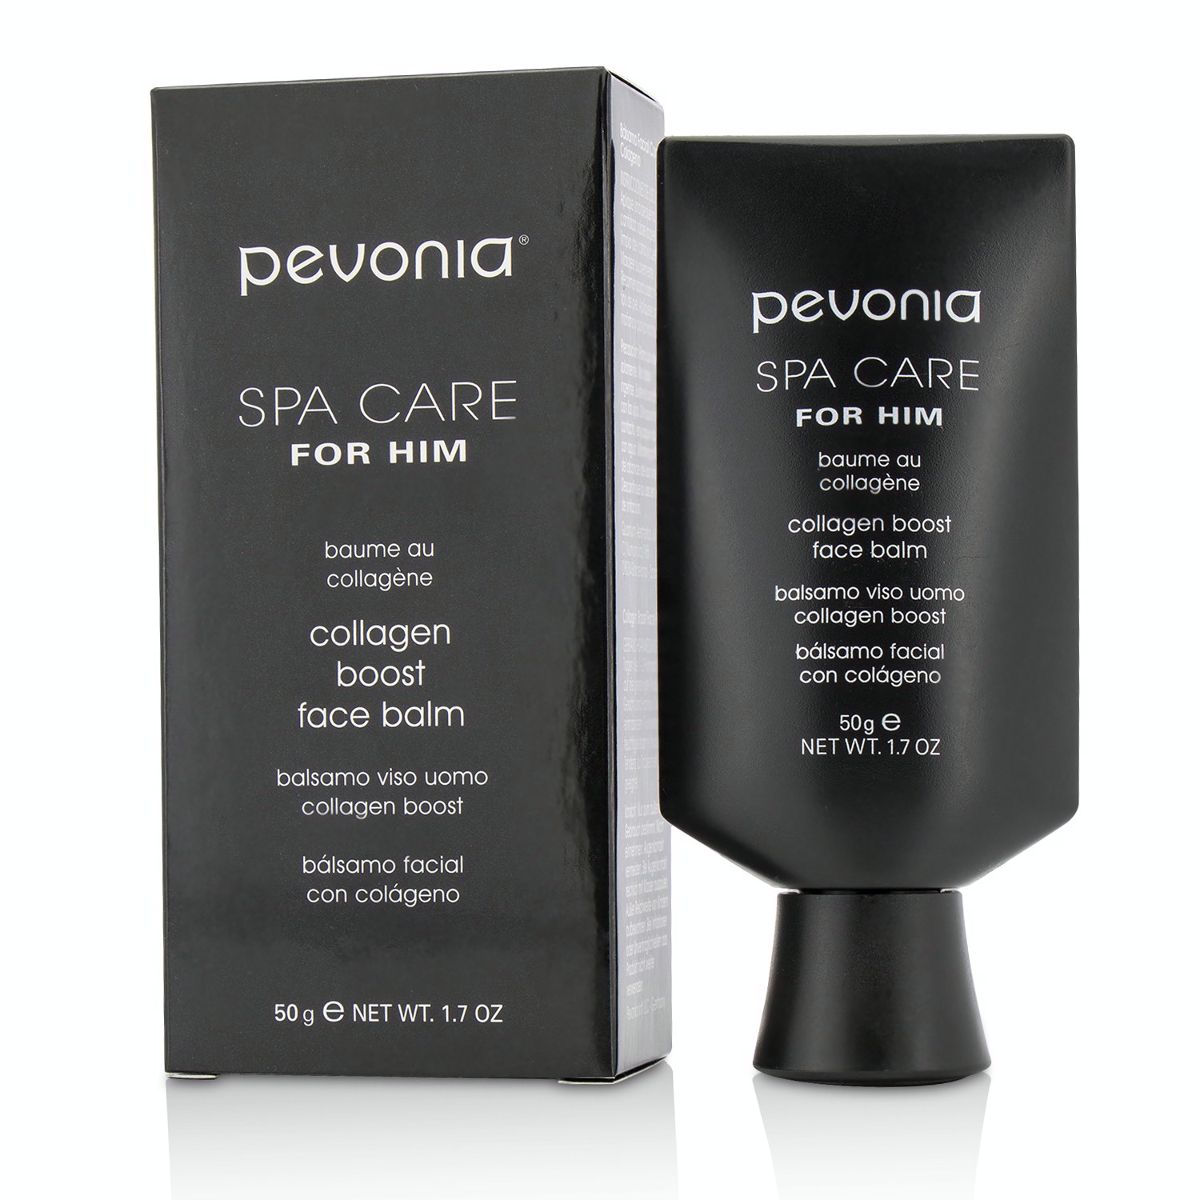 Spa Care For Him Collagen Boost Face Balm Pevonia Botanica Image